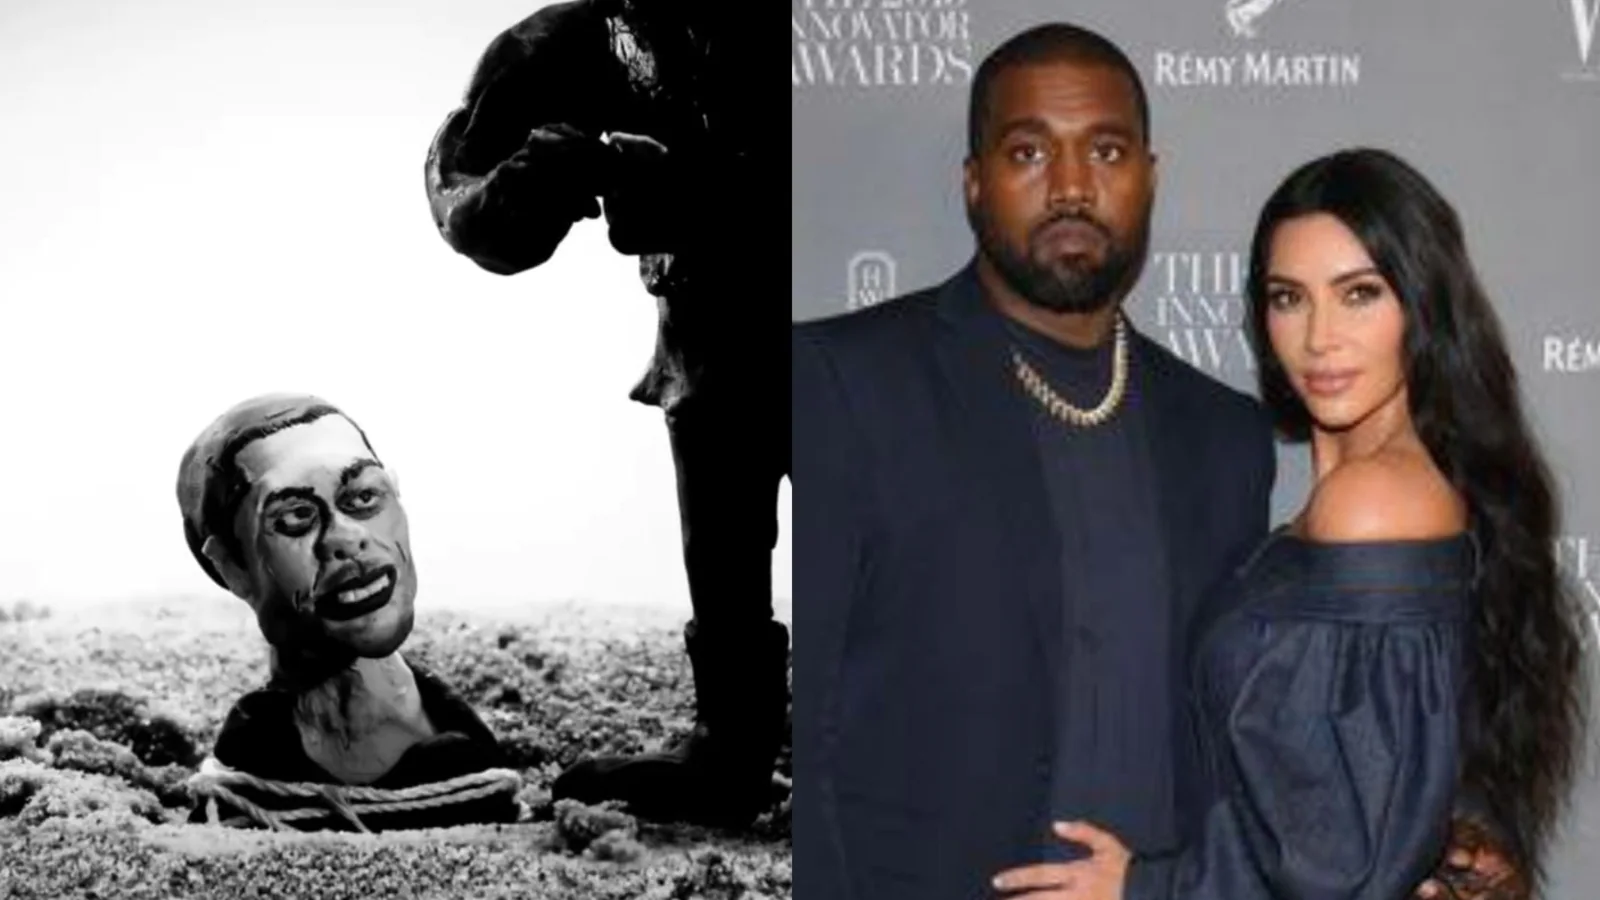 Kanye West shares ‘disturbing’ video showing Pete Davidson being buried as marriage with Kim Kardashian officially ends